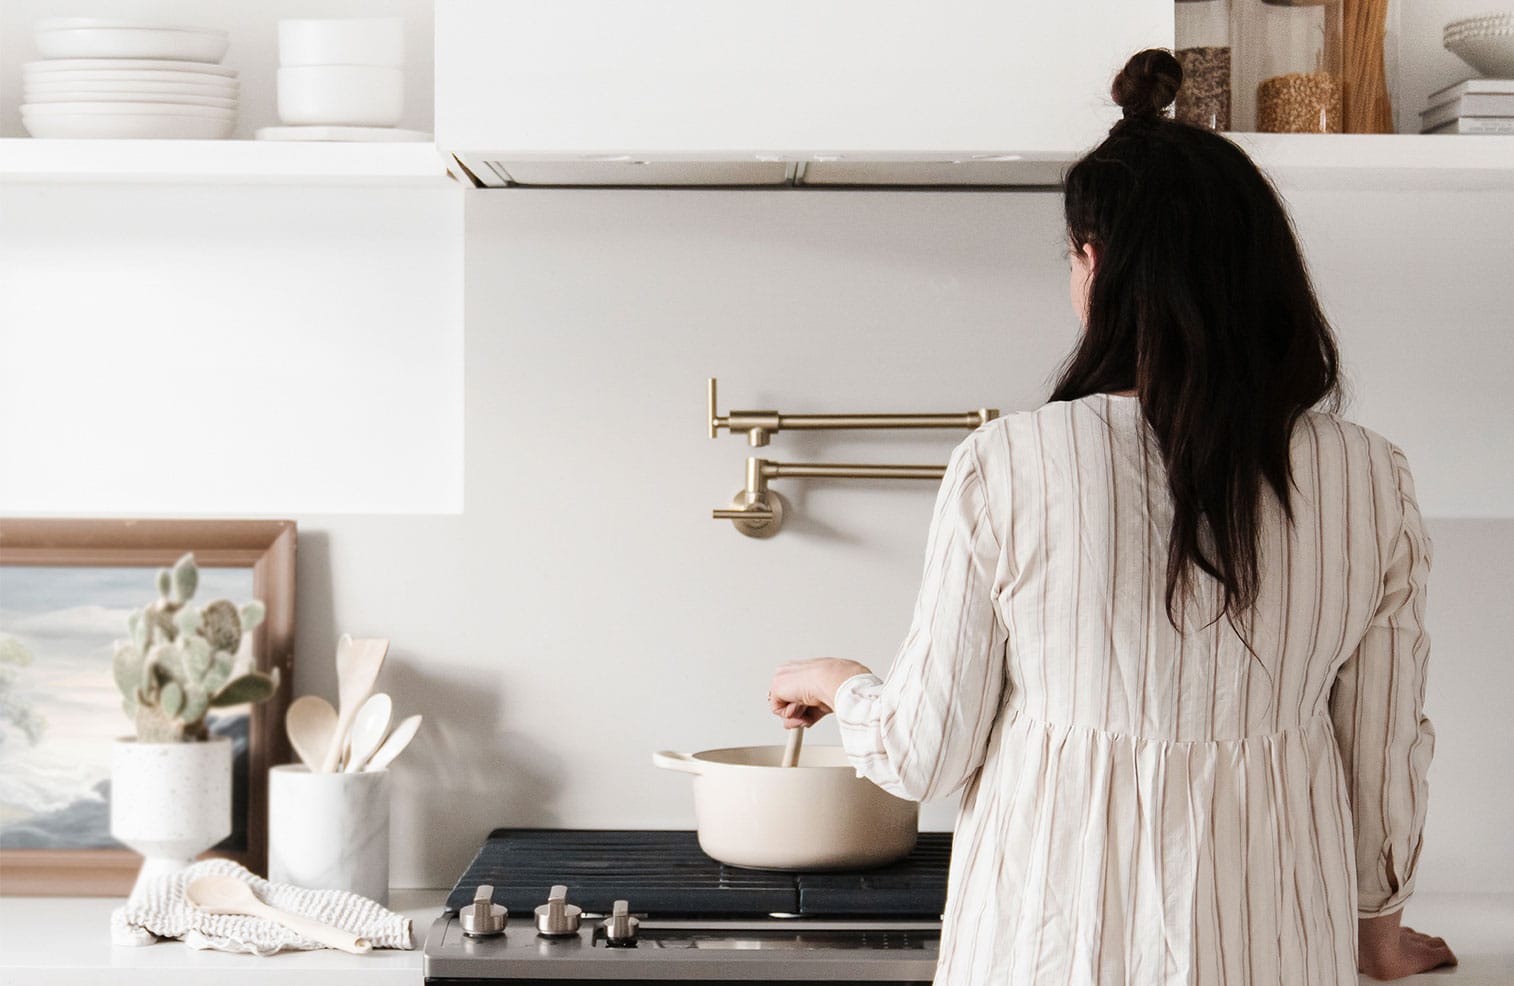 Do you ever open that drawer in your kitchen and realize just how unorganized it's become. The kitchen is the heart of the home and can easily get out of order. Here are some tips on how to quickly organize your kitchen and keep it tidy and functional for you and your family!